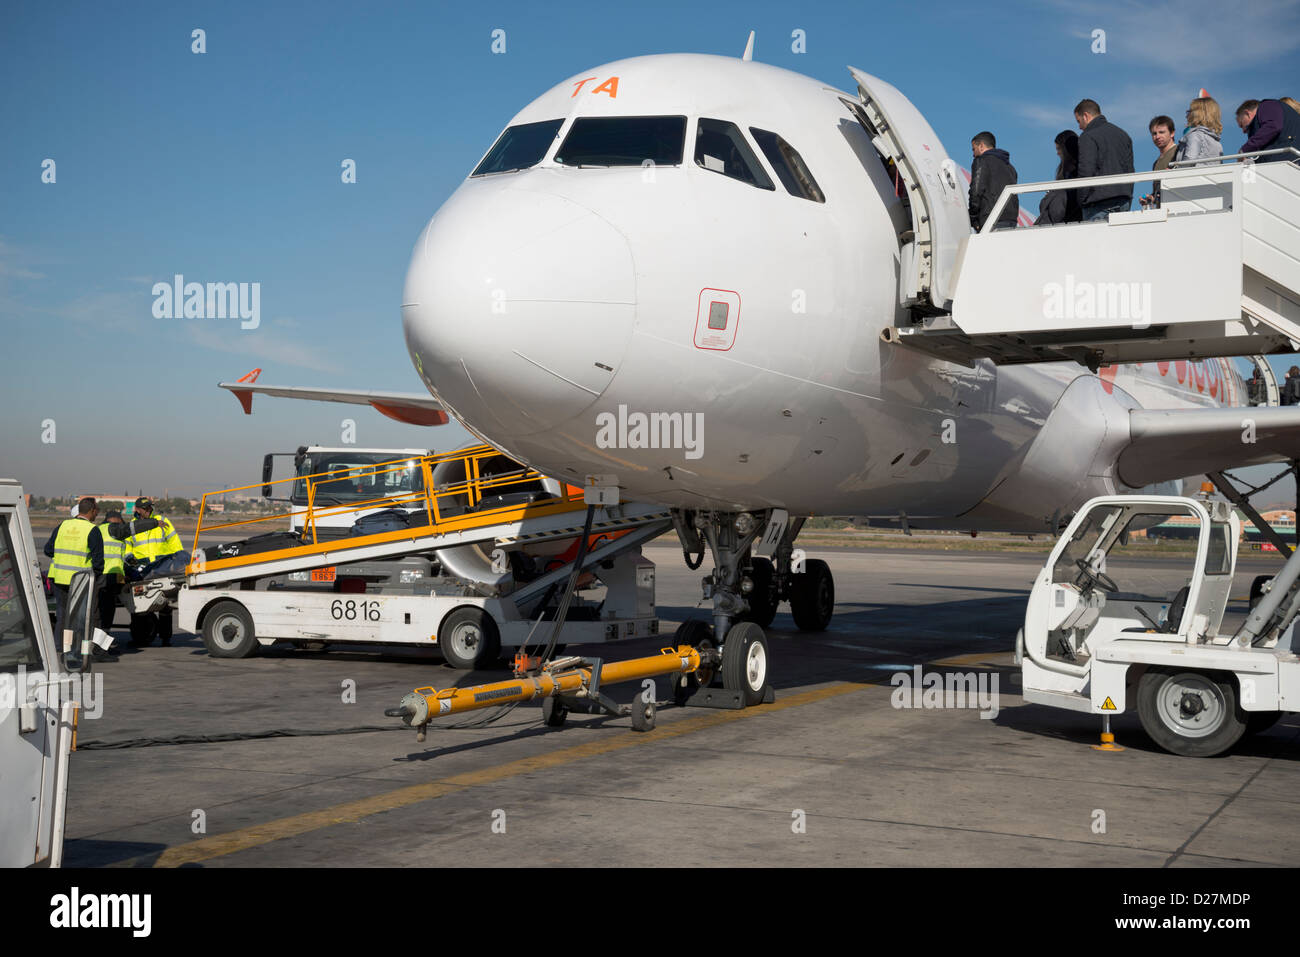 Luggage bags being loaded onto an aircraft and passengers boarding Stock Photo